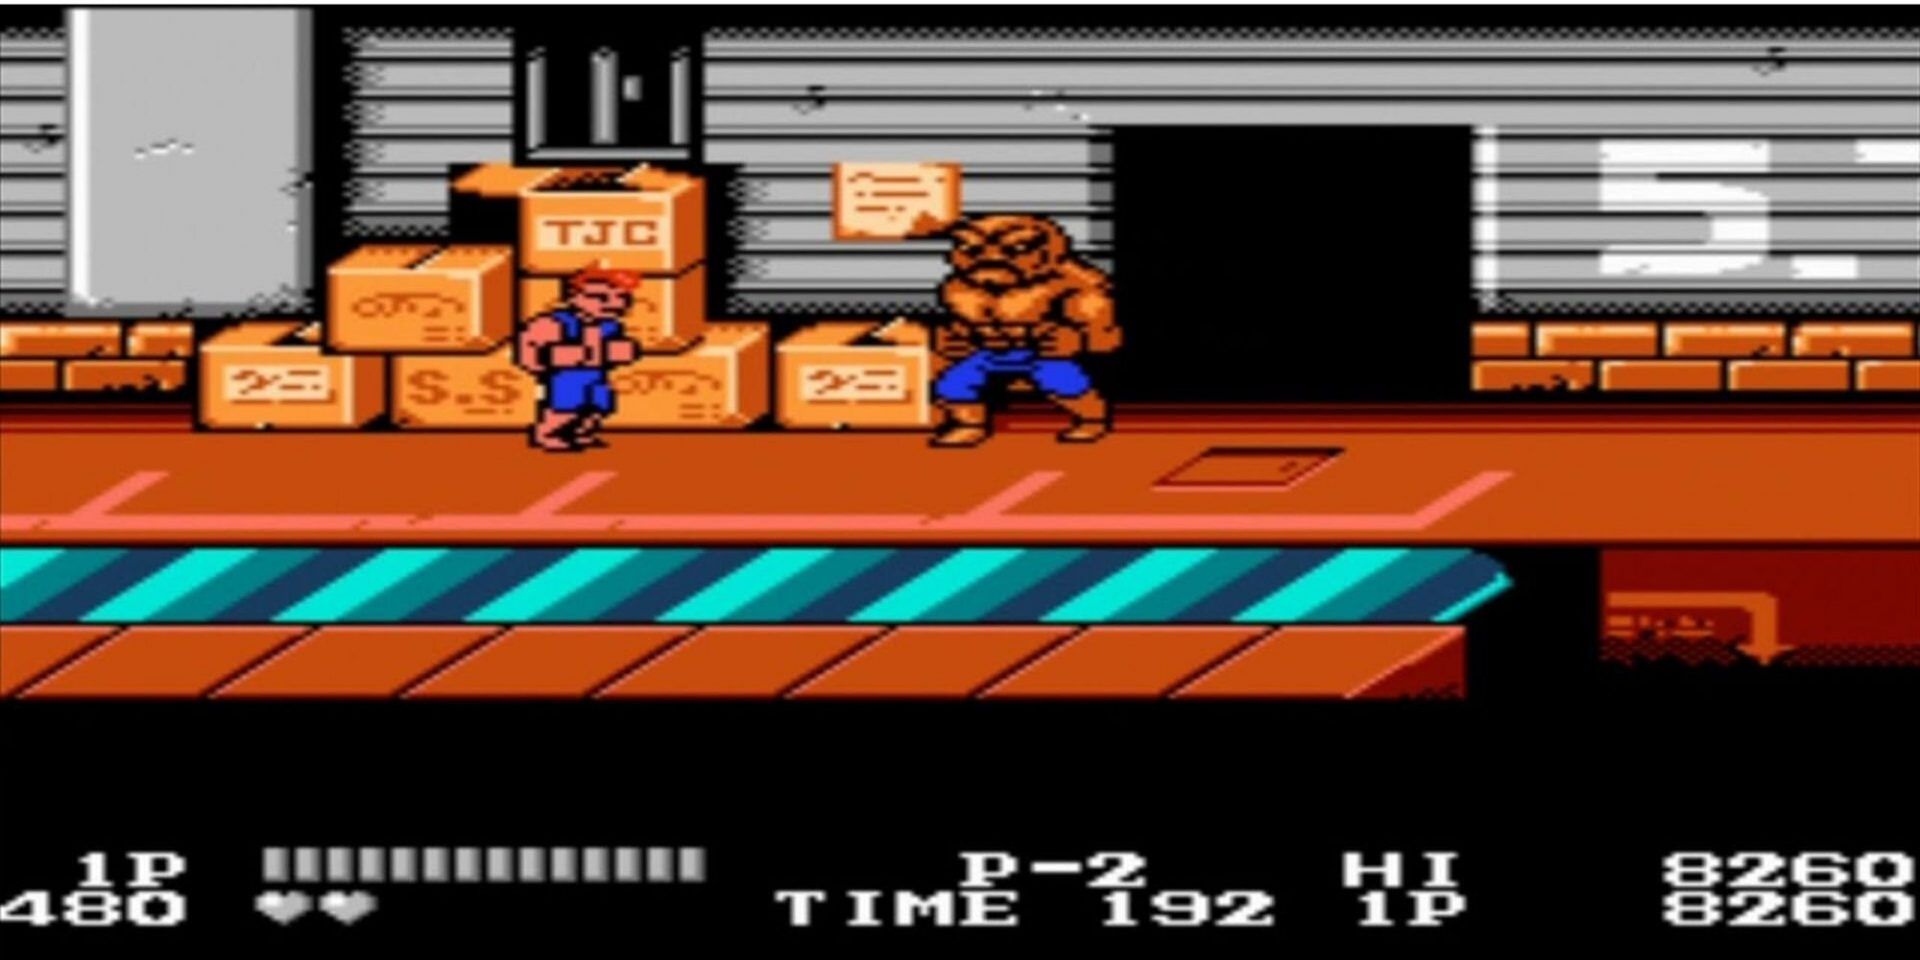 Billy gets ready to take on Abobo